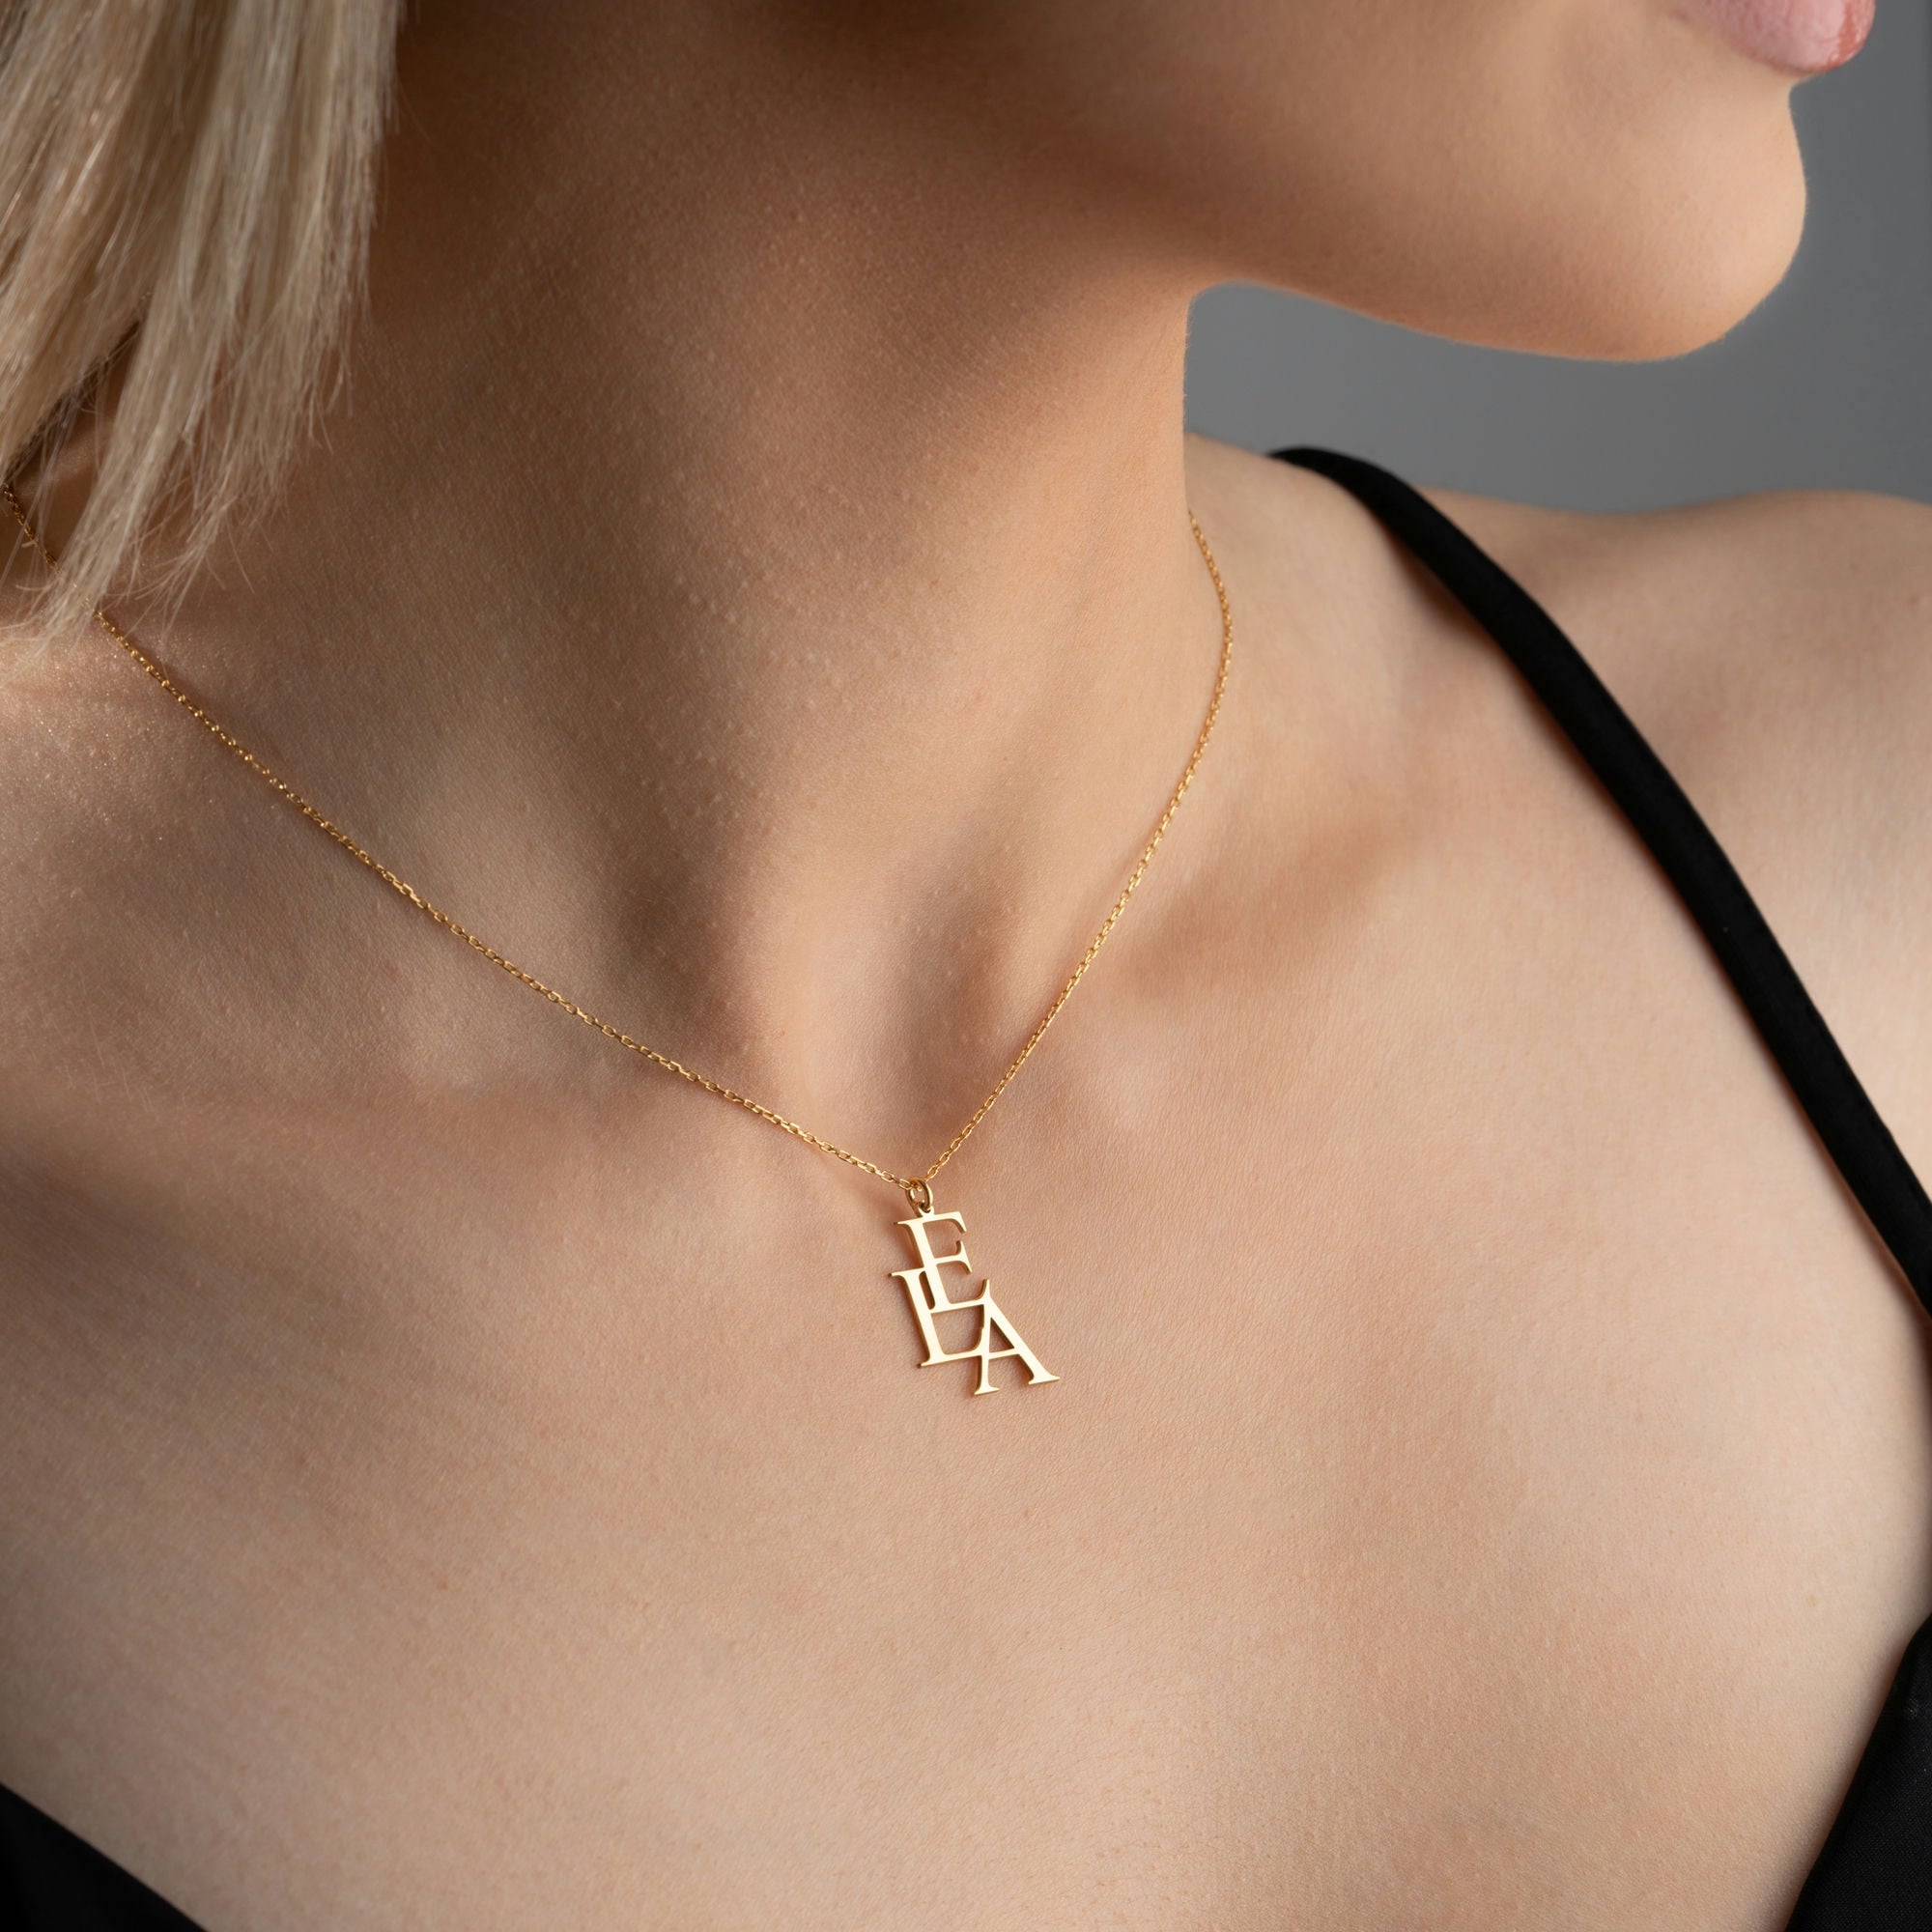 Handcrafted Vertical Initials Necklace for Your Family